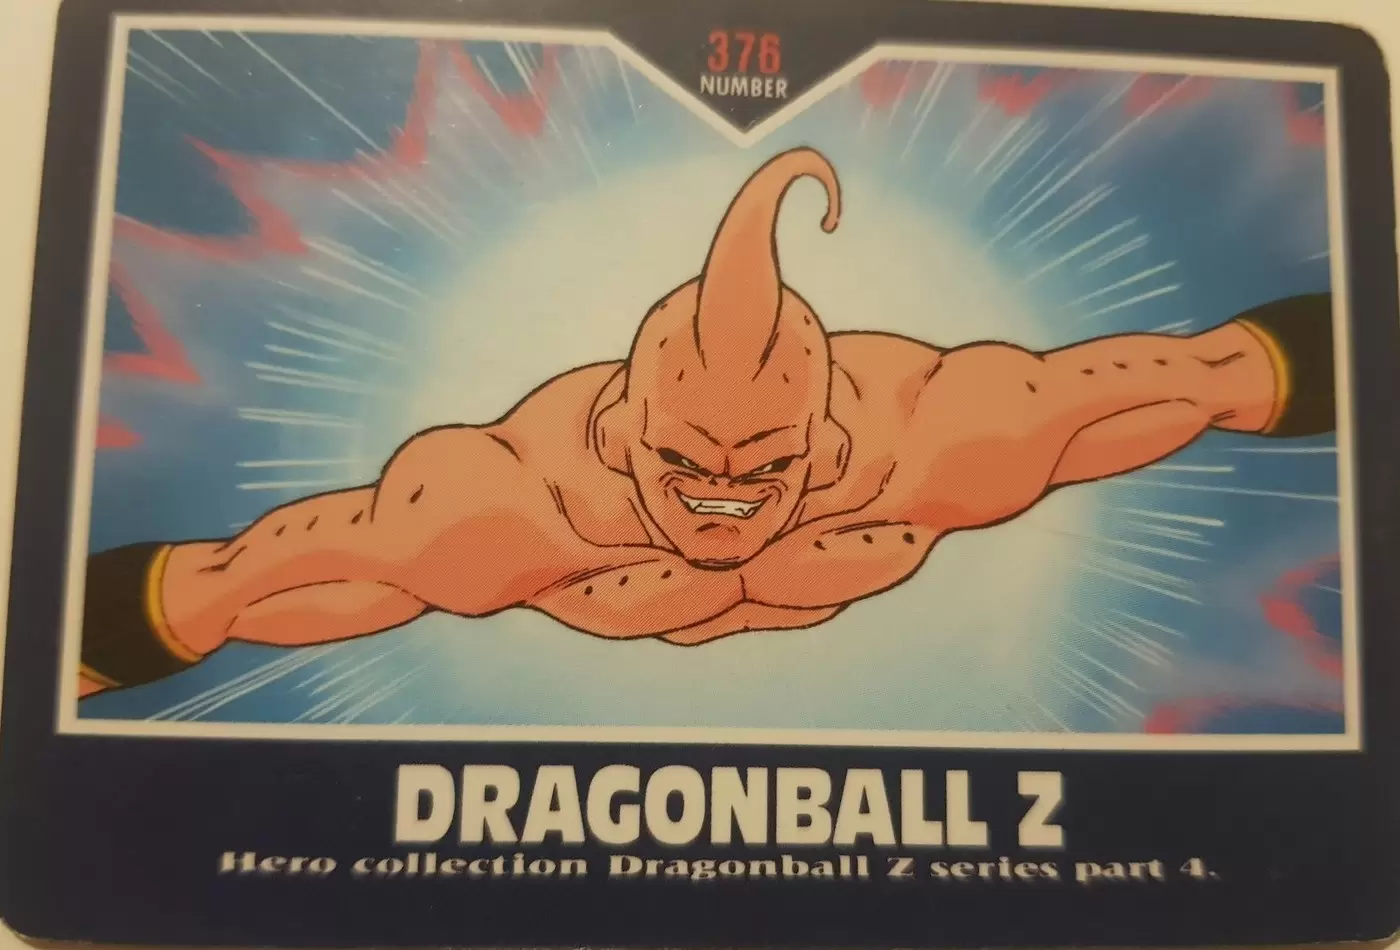 Dragon Ball Z Hero Collection Series Part 4 - Card number 376